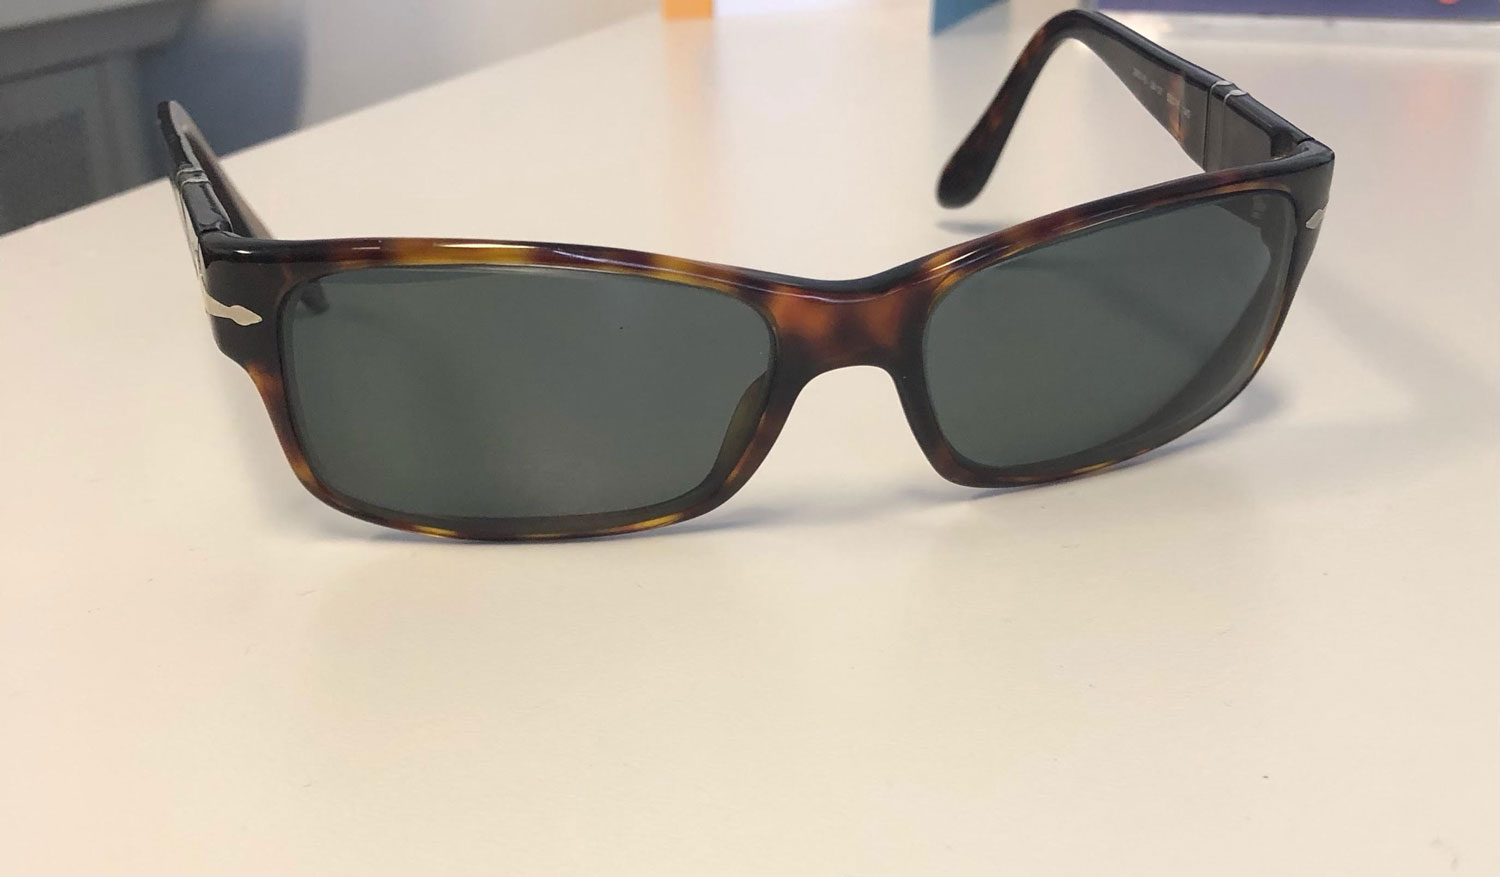 Persol 2803-s Sunglasses from The November Man